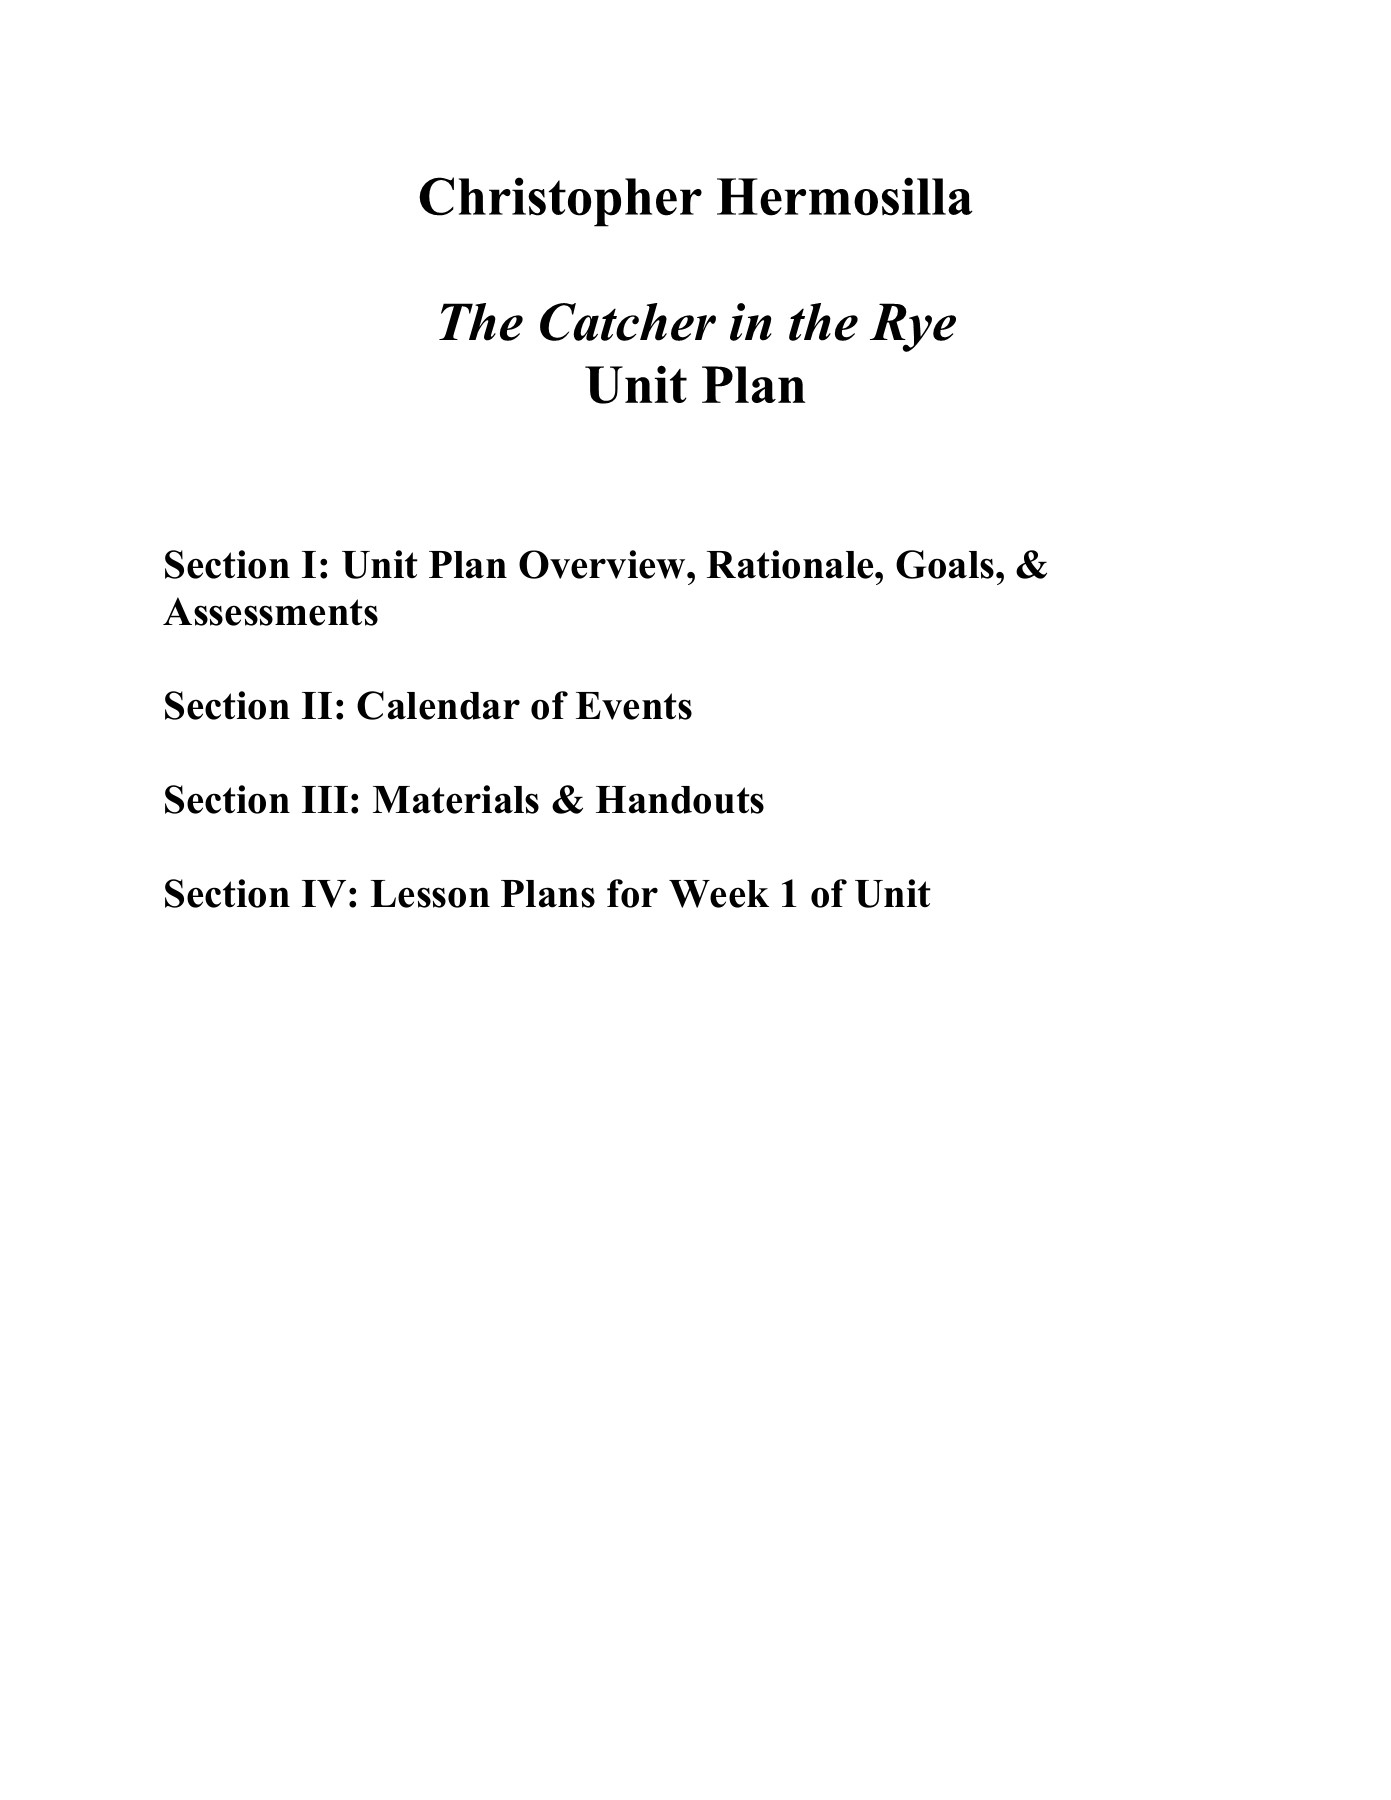 The Catcher In The Rye Unit Plan Pages 1 - 50 - Text Version